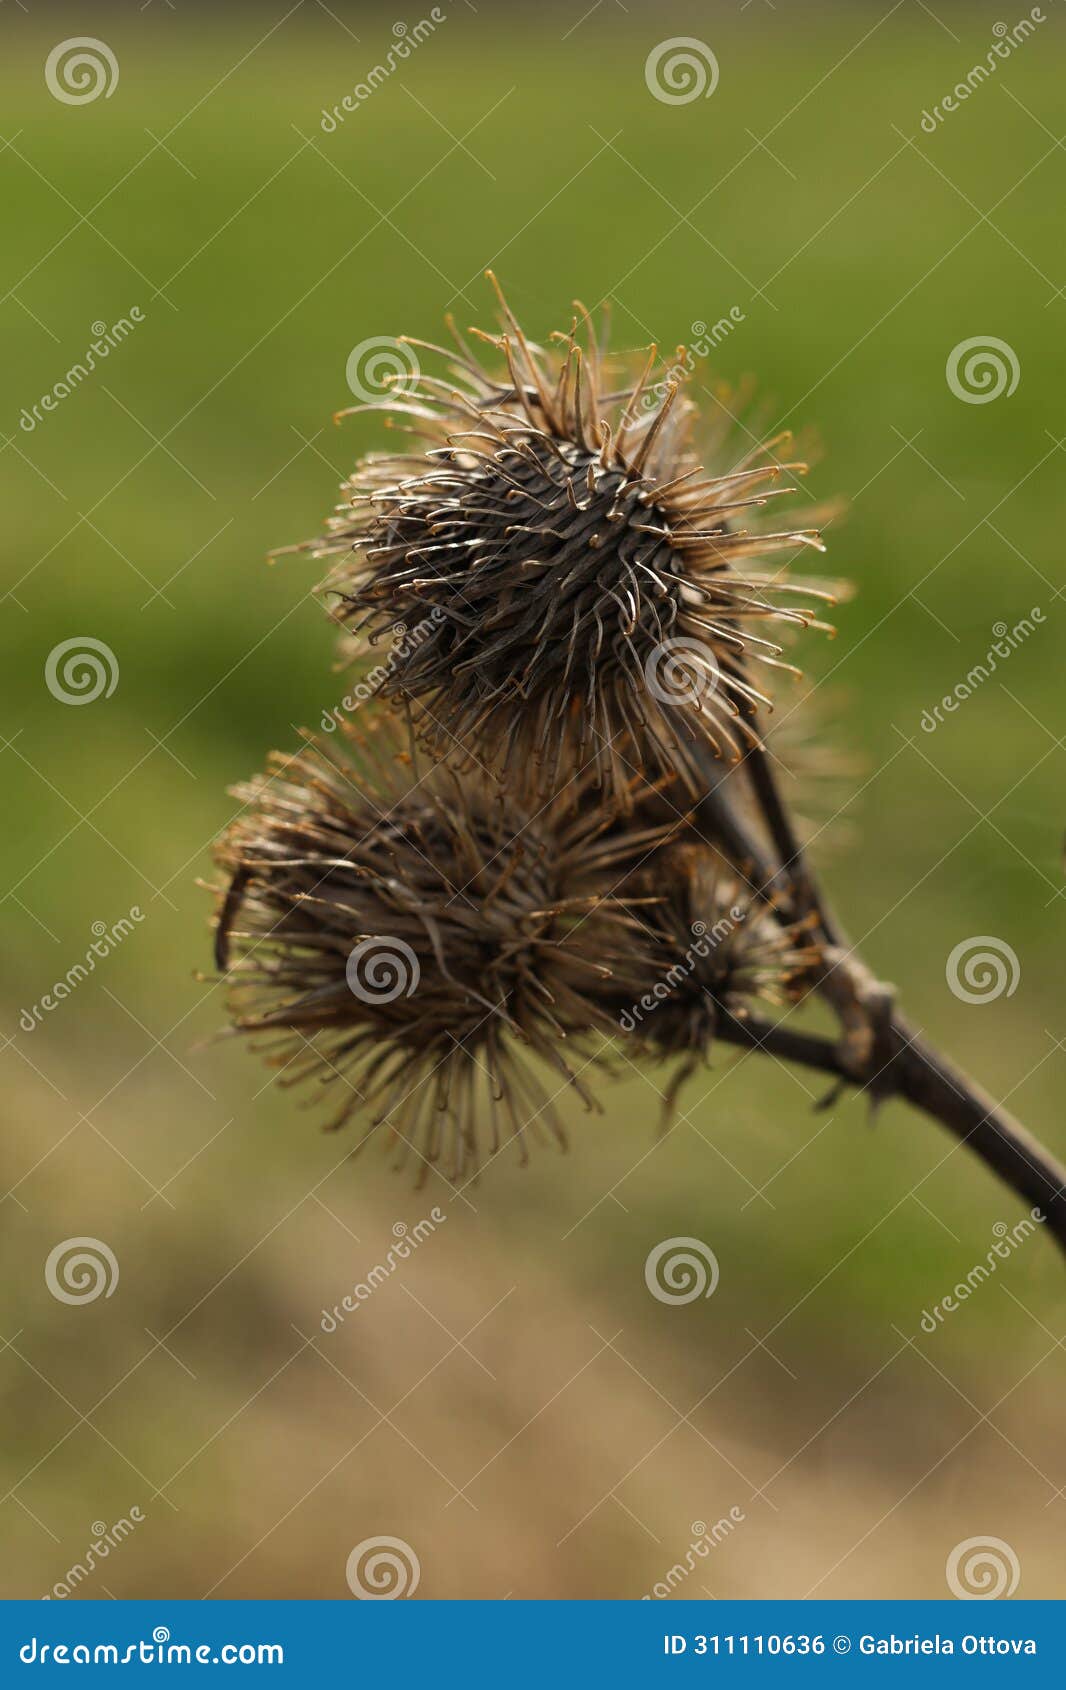 arctium lappa, commonly called greater burdock, gob?, edible burdock, lappa, beggar's buttons, thorny burr, or happy major